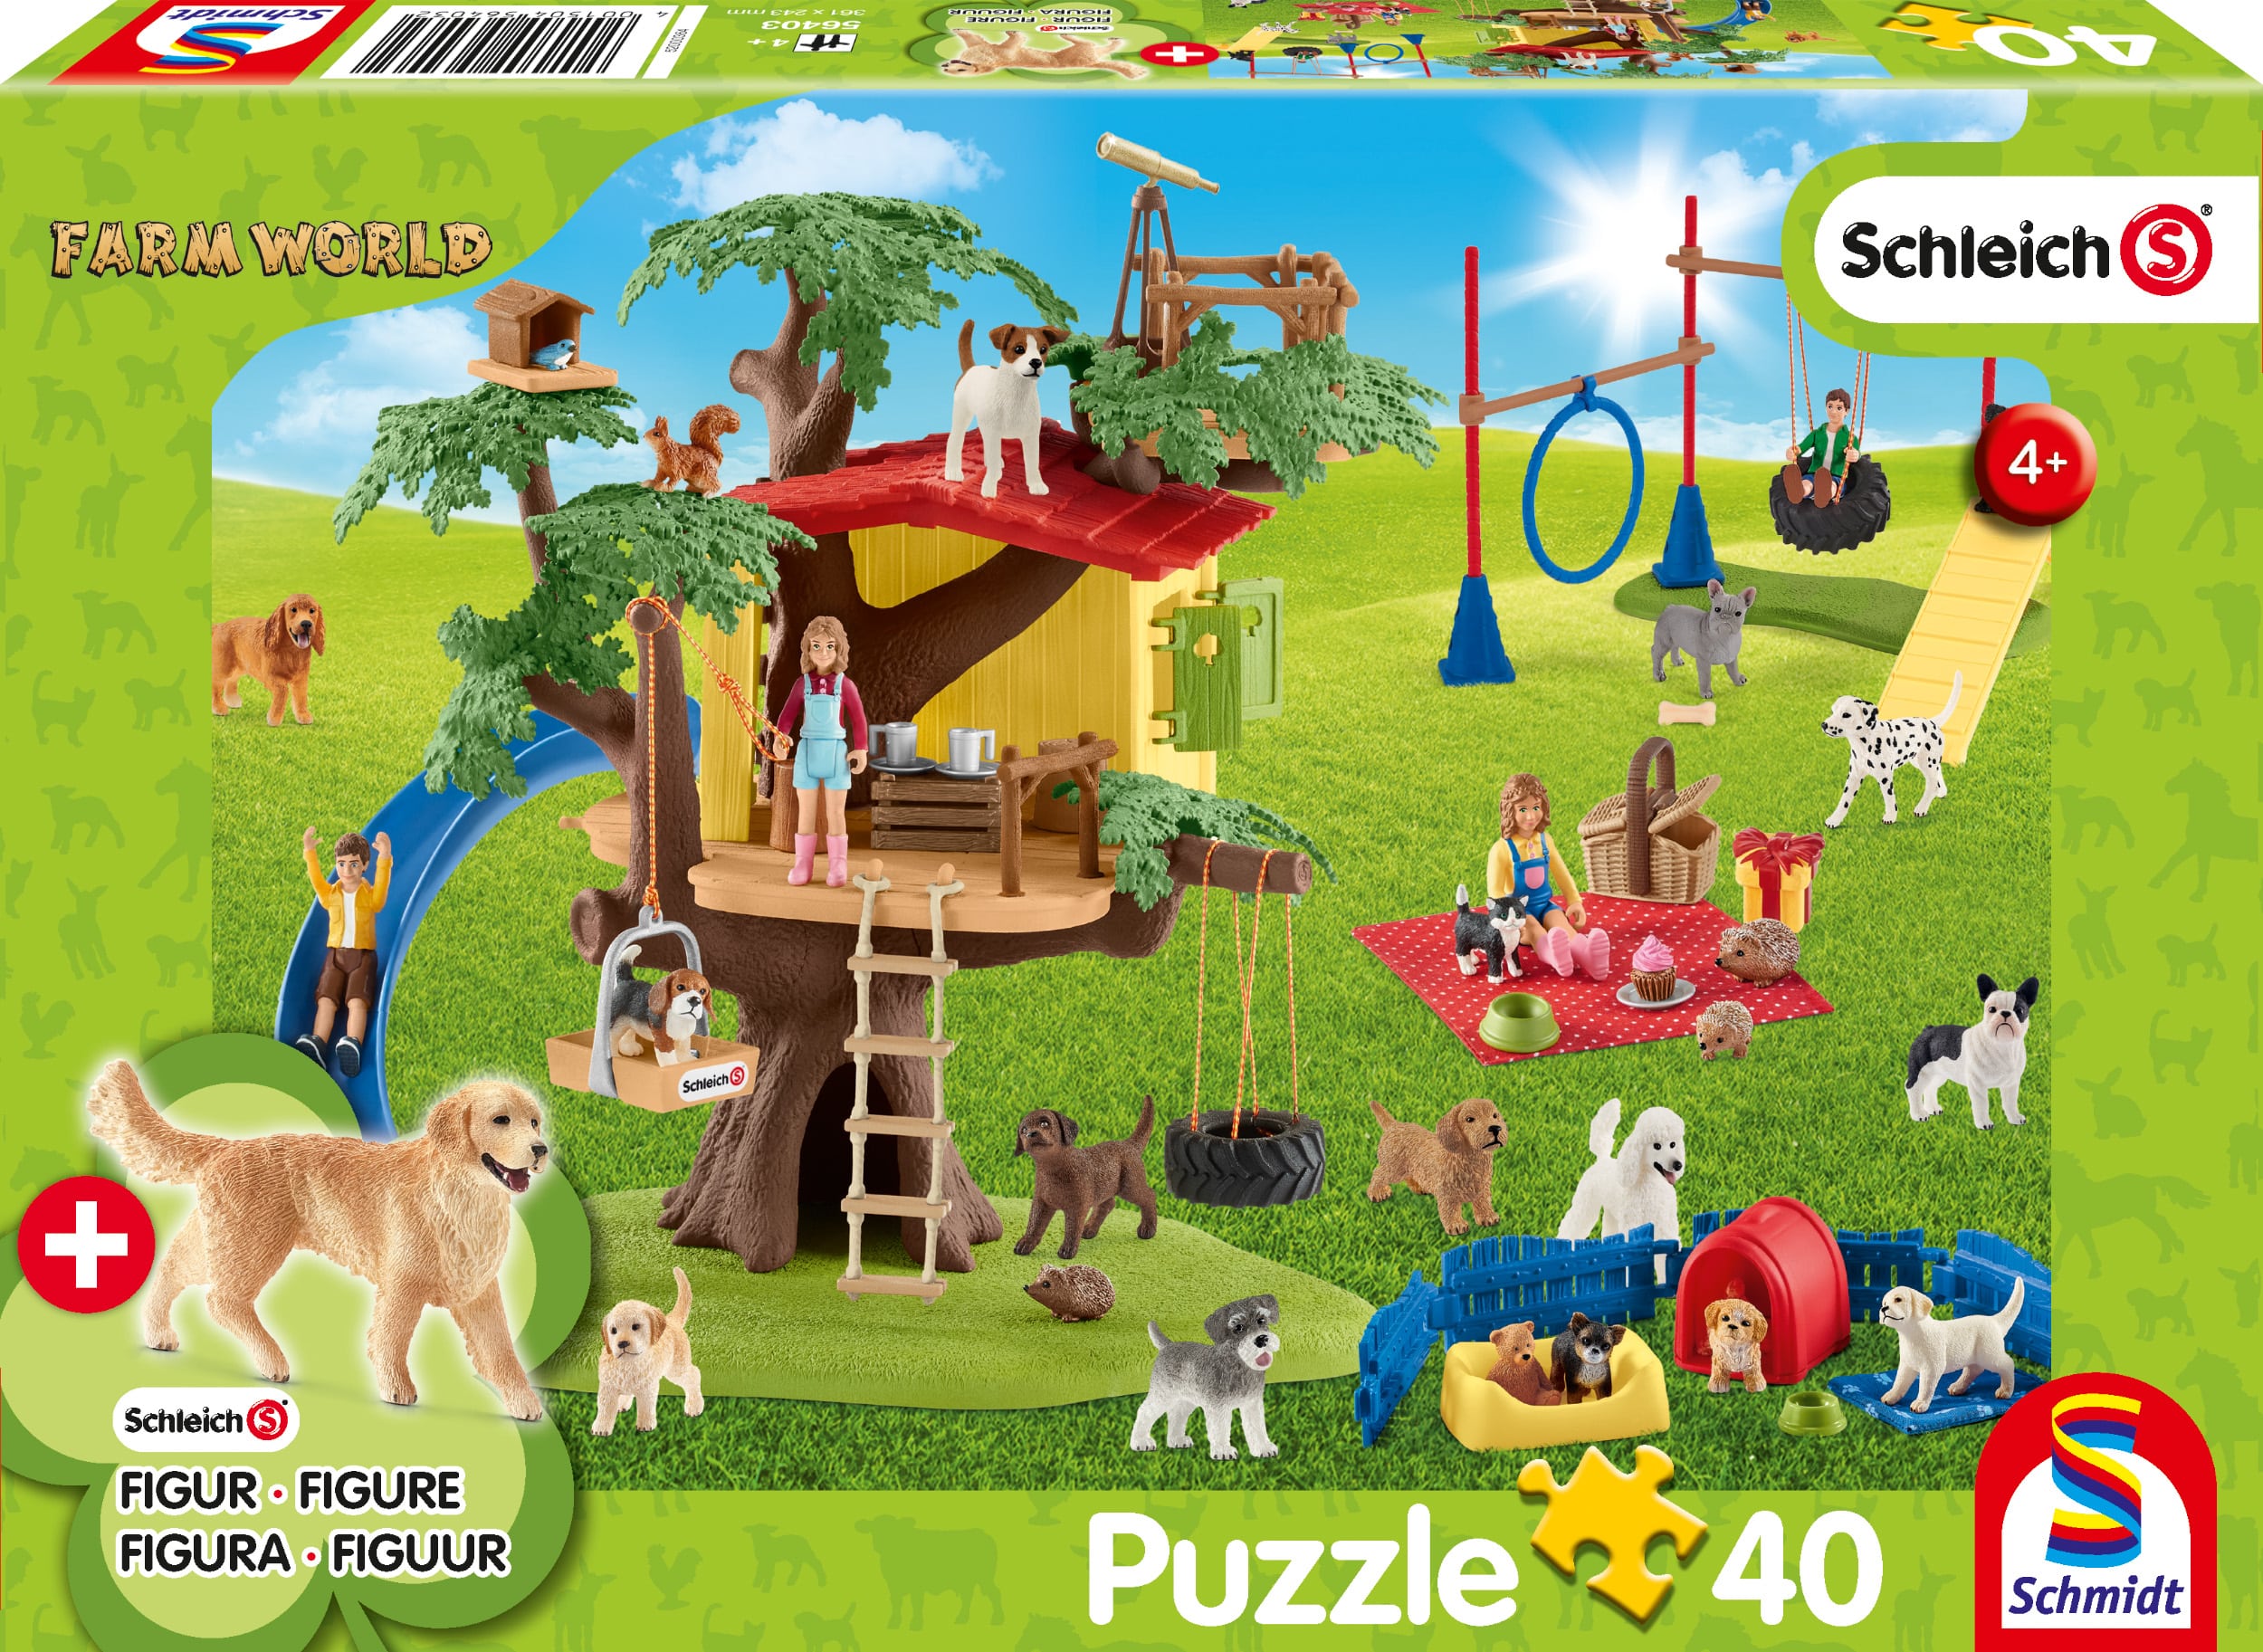 Schleich A Day at the Farm 40 piece jigsaw with two Schleich Figures 